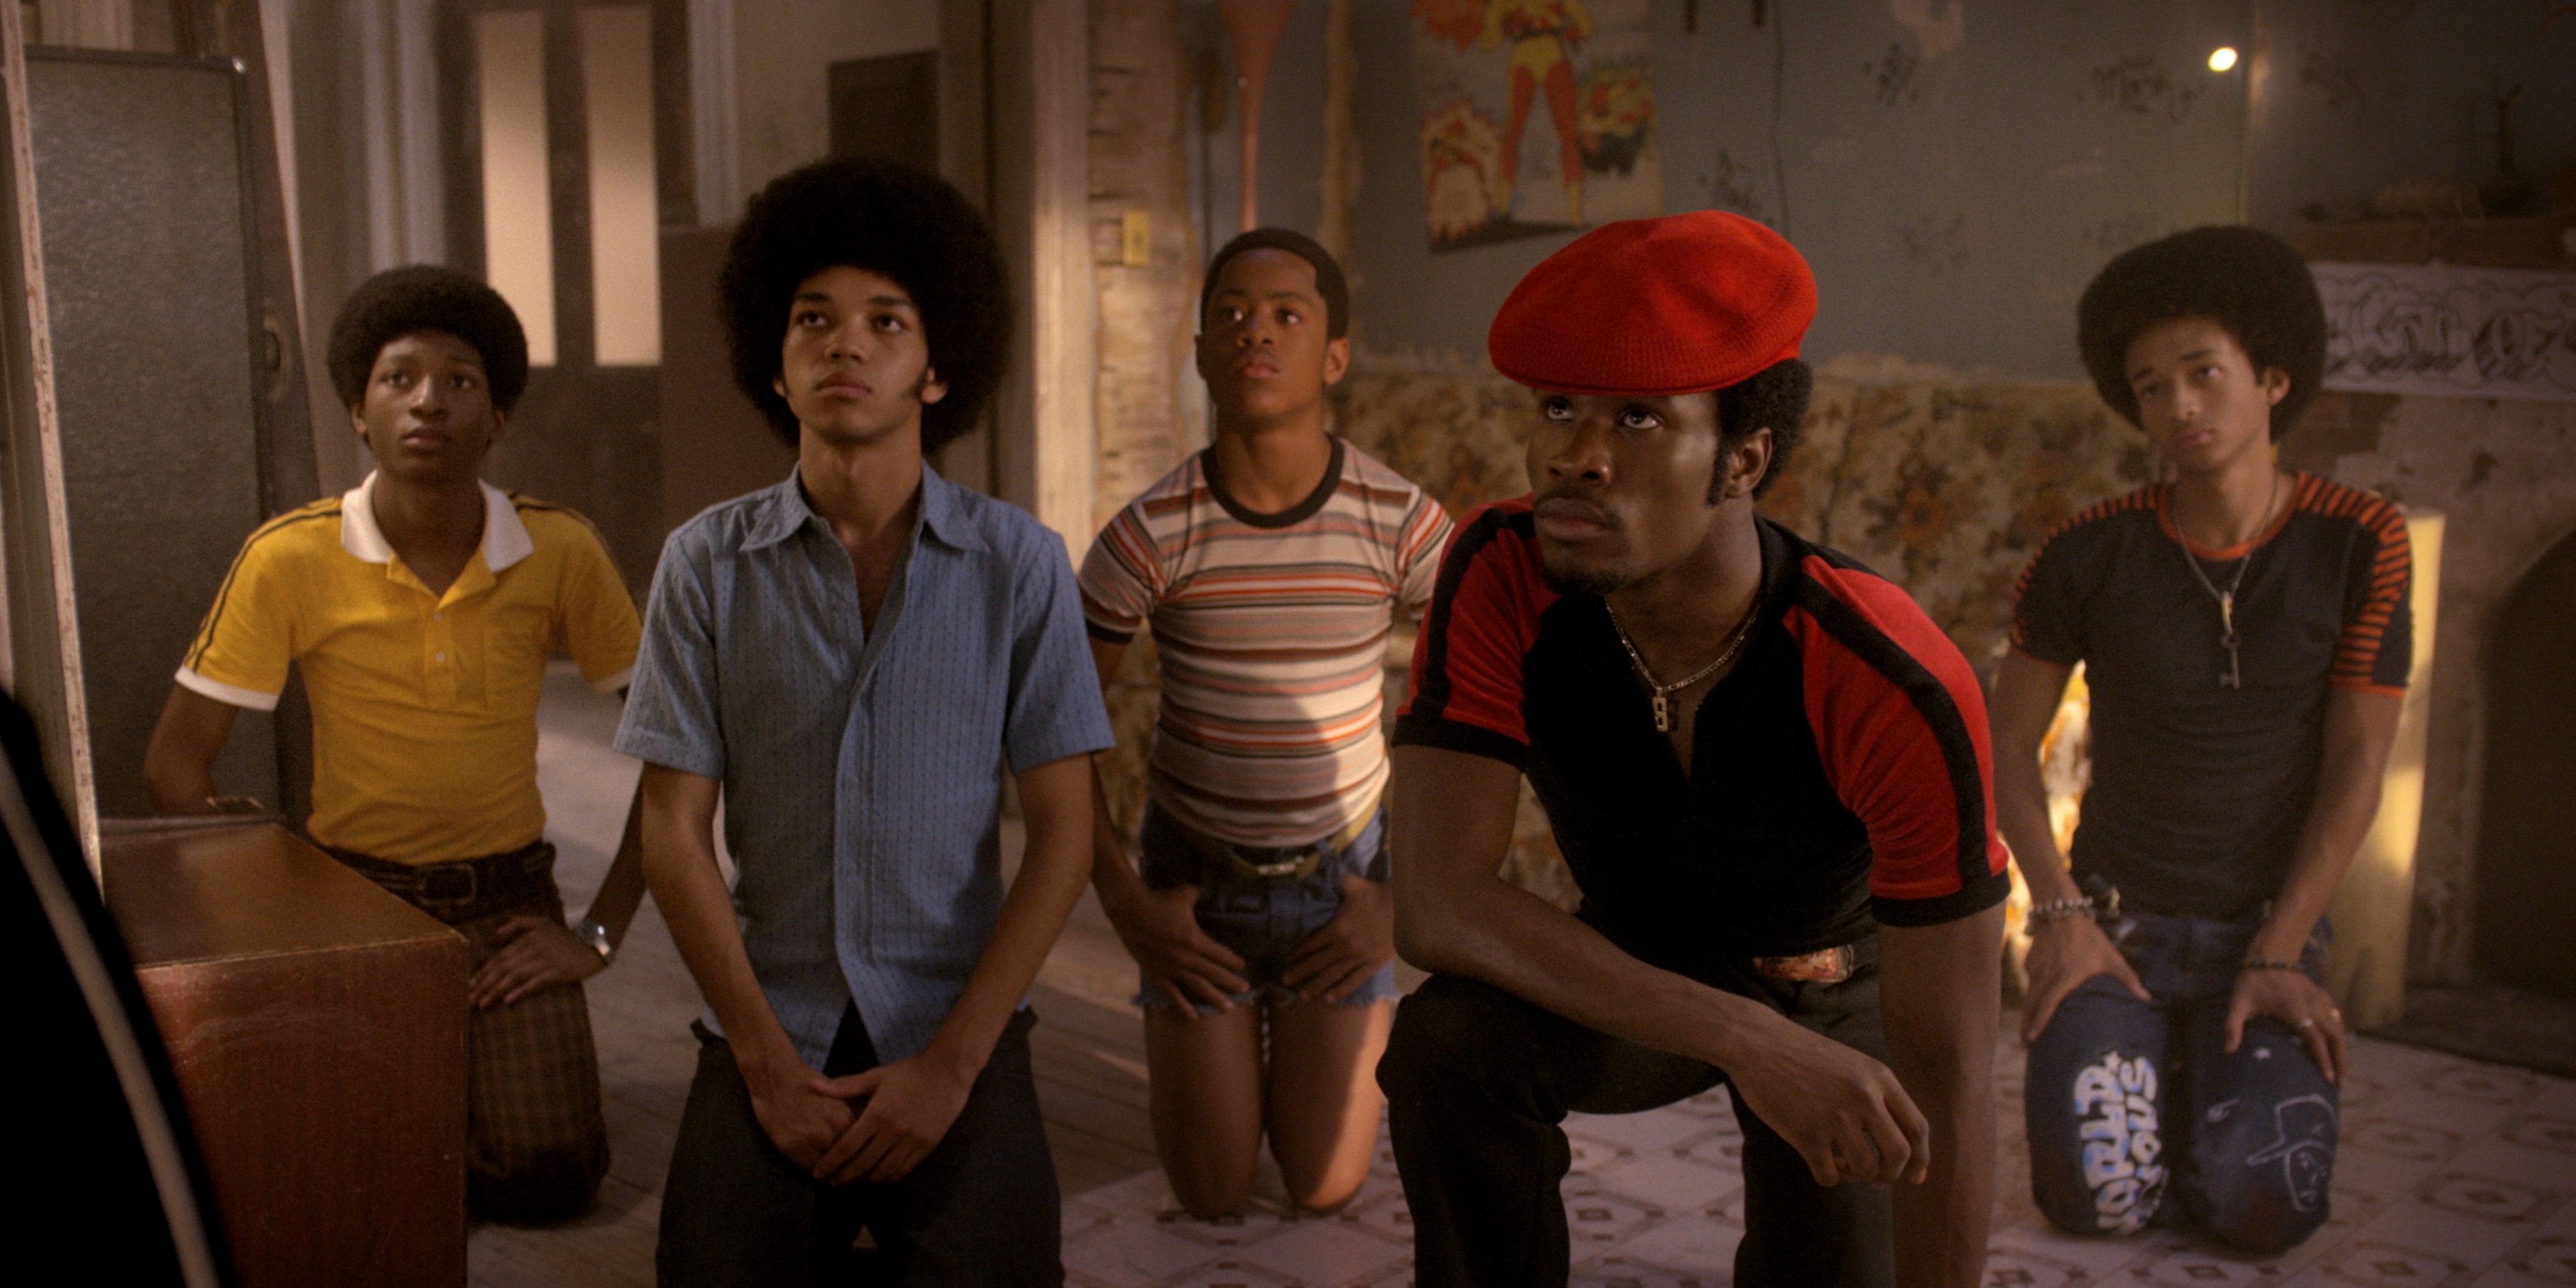 The main cast of The Get Down kneels on the floor